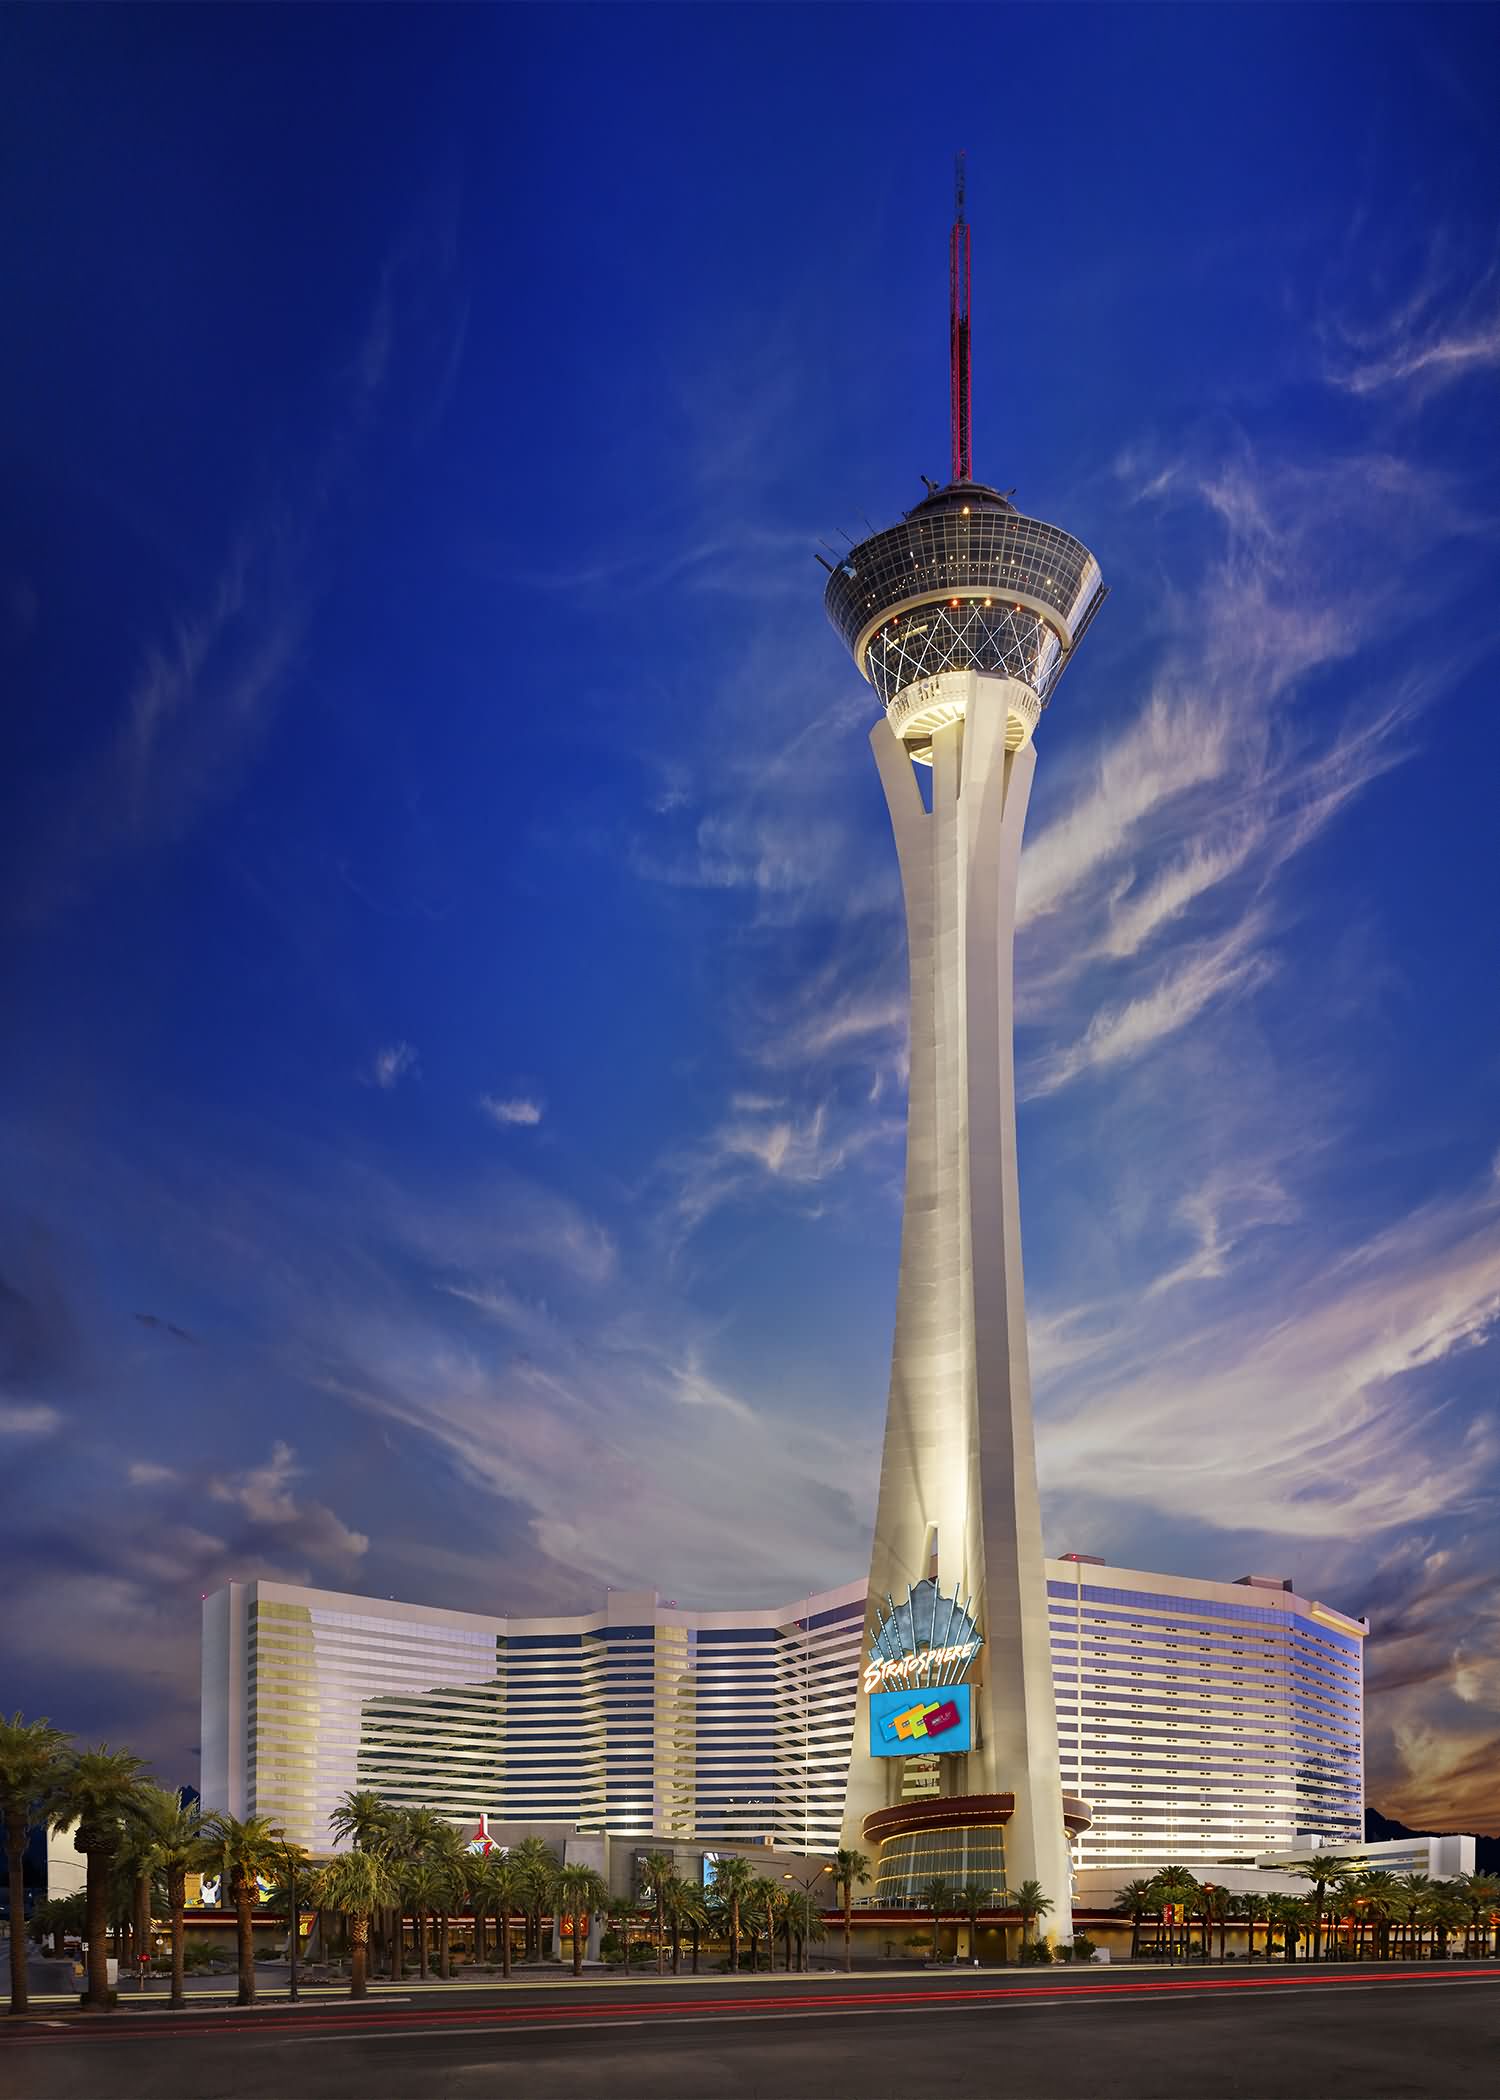 The Stratosphere Tower During Dusk